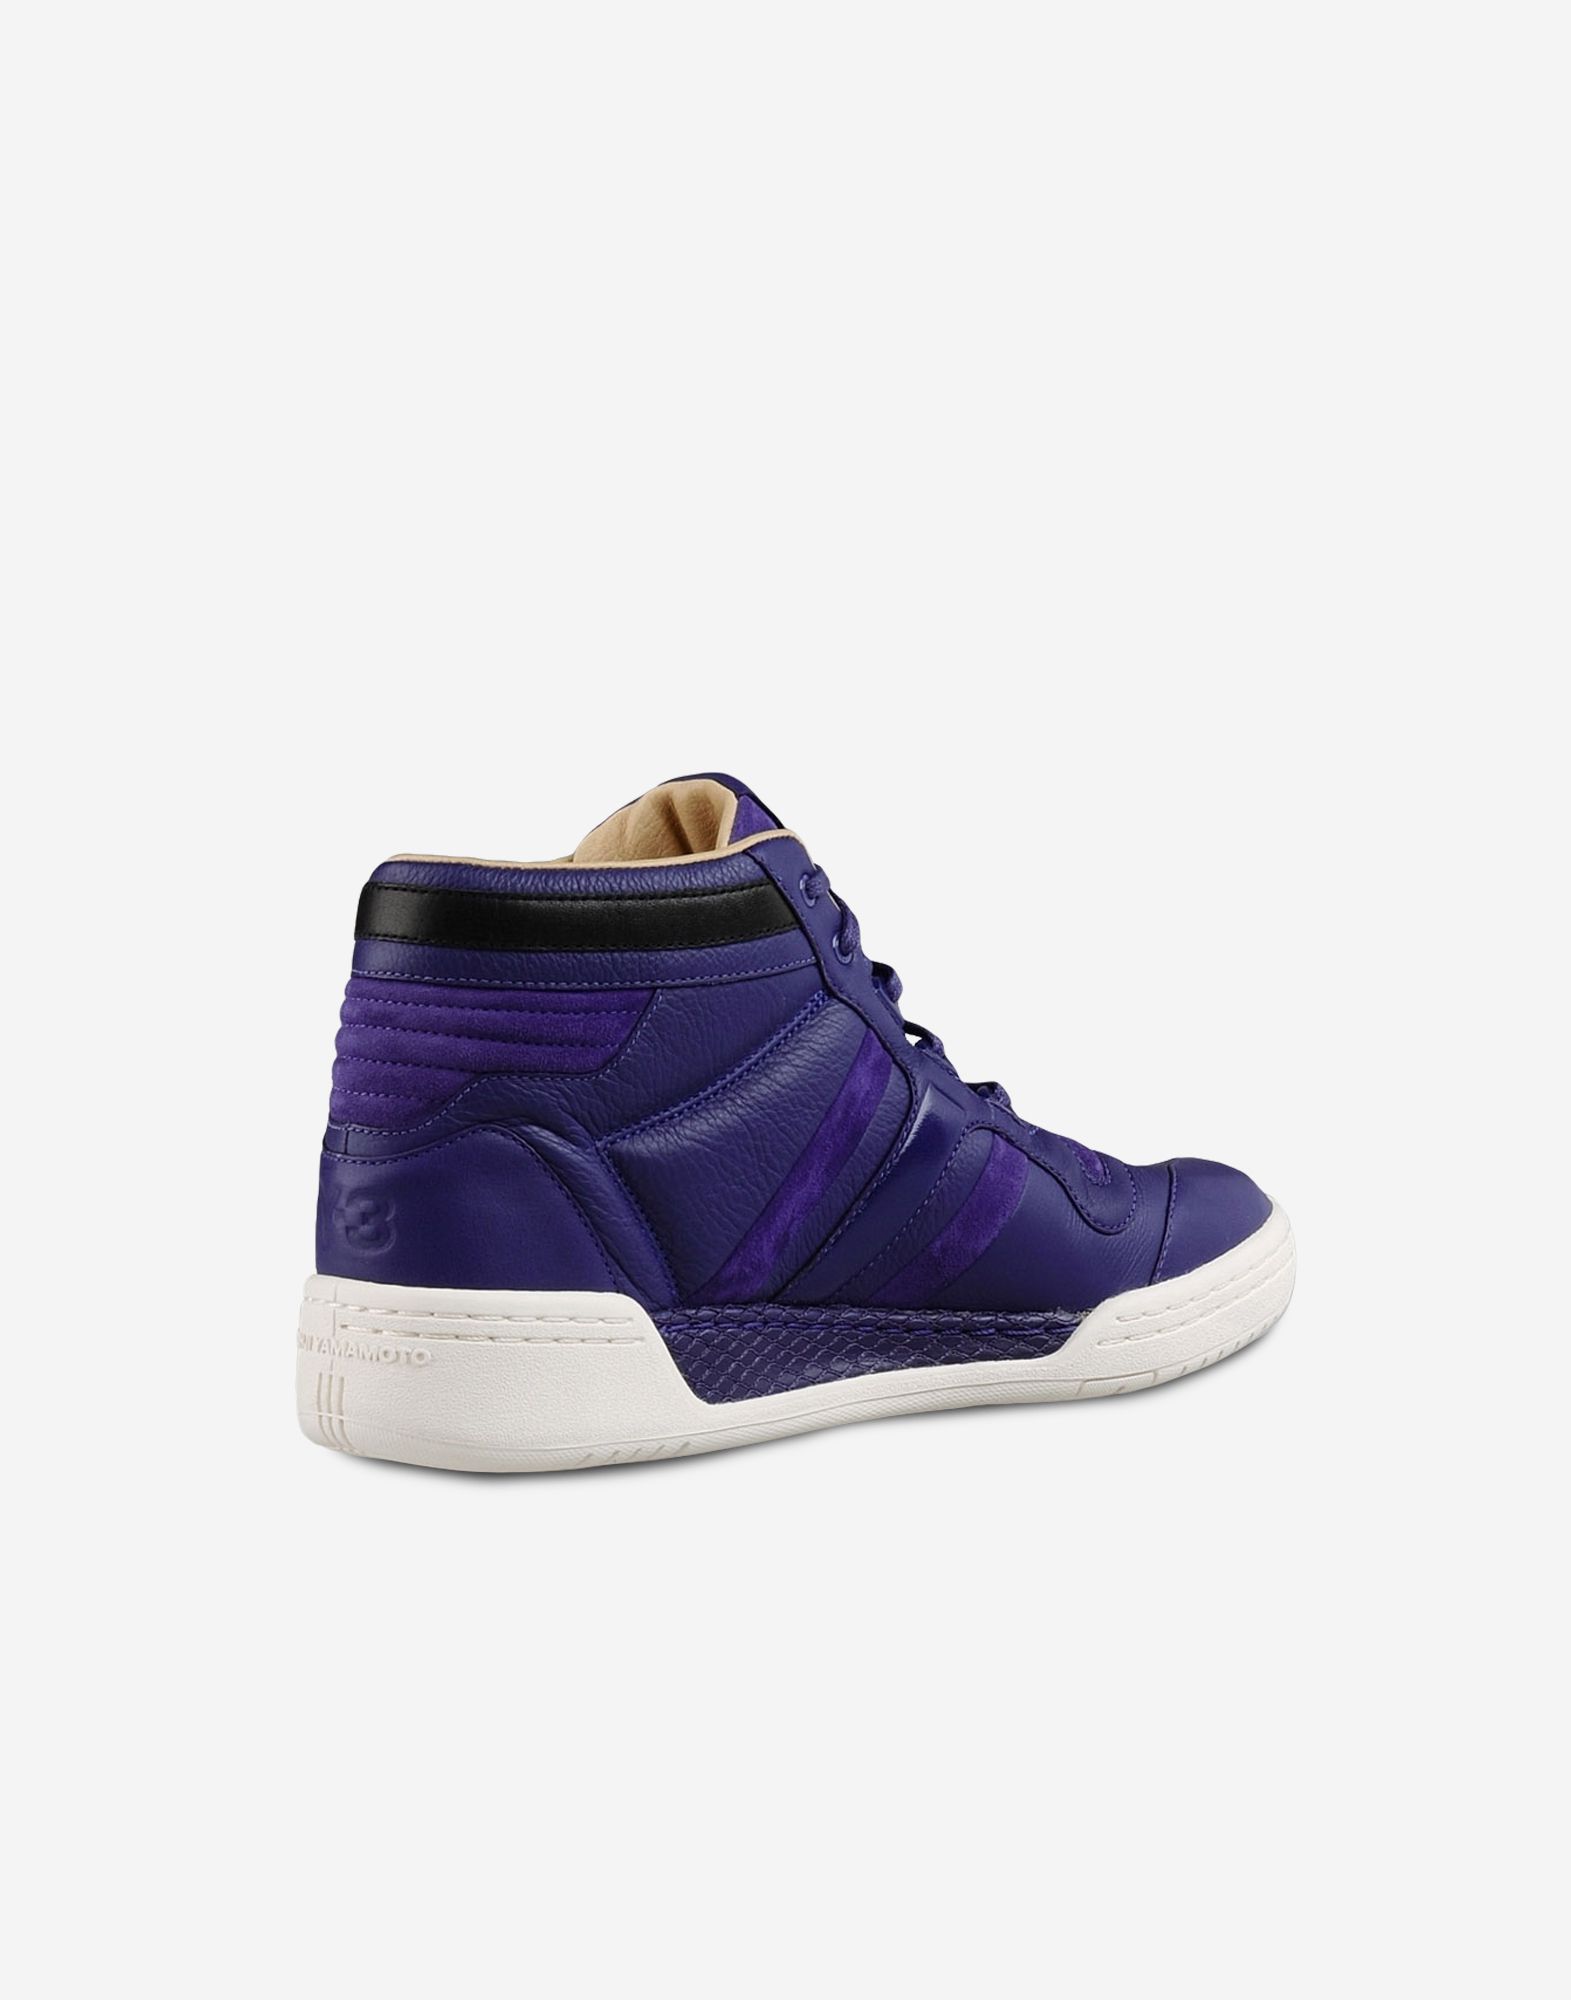 Y 3 Courtside 2 for Men | Adidas Y-3 Official Store